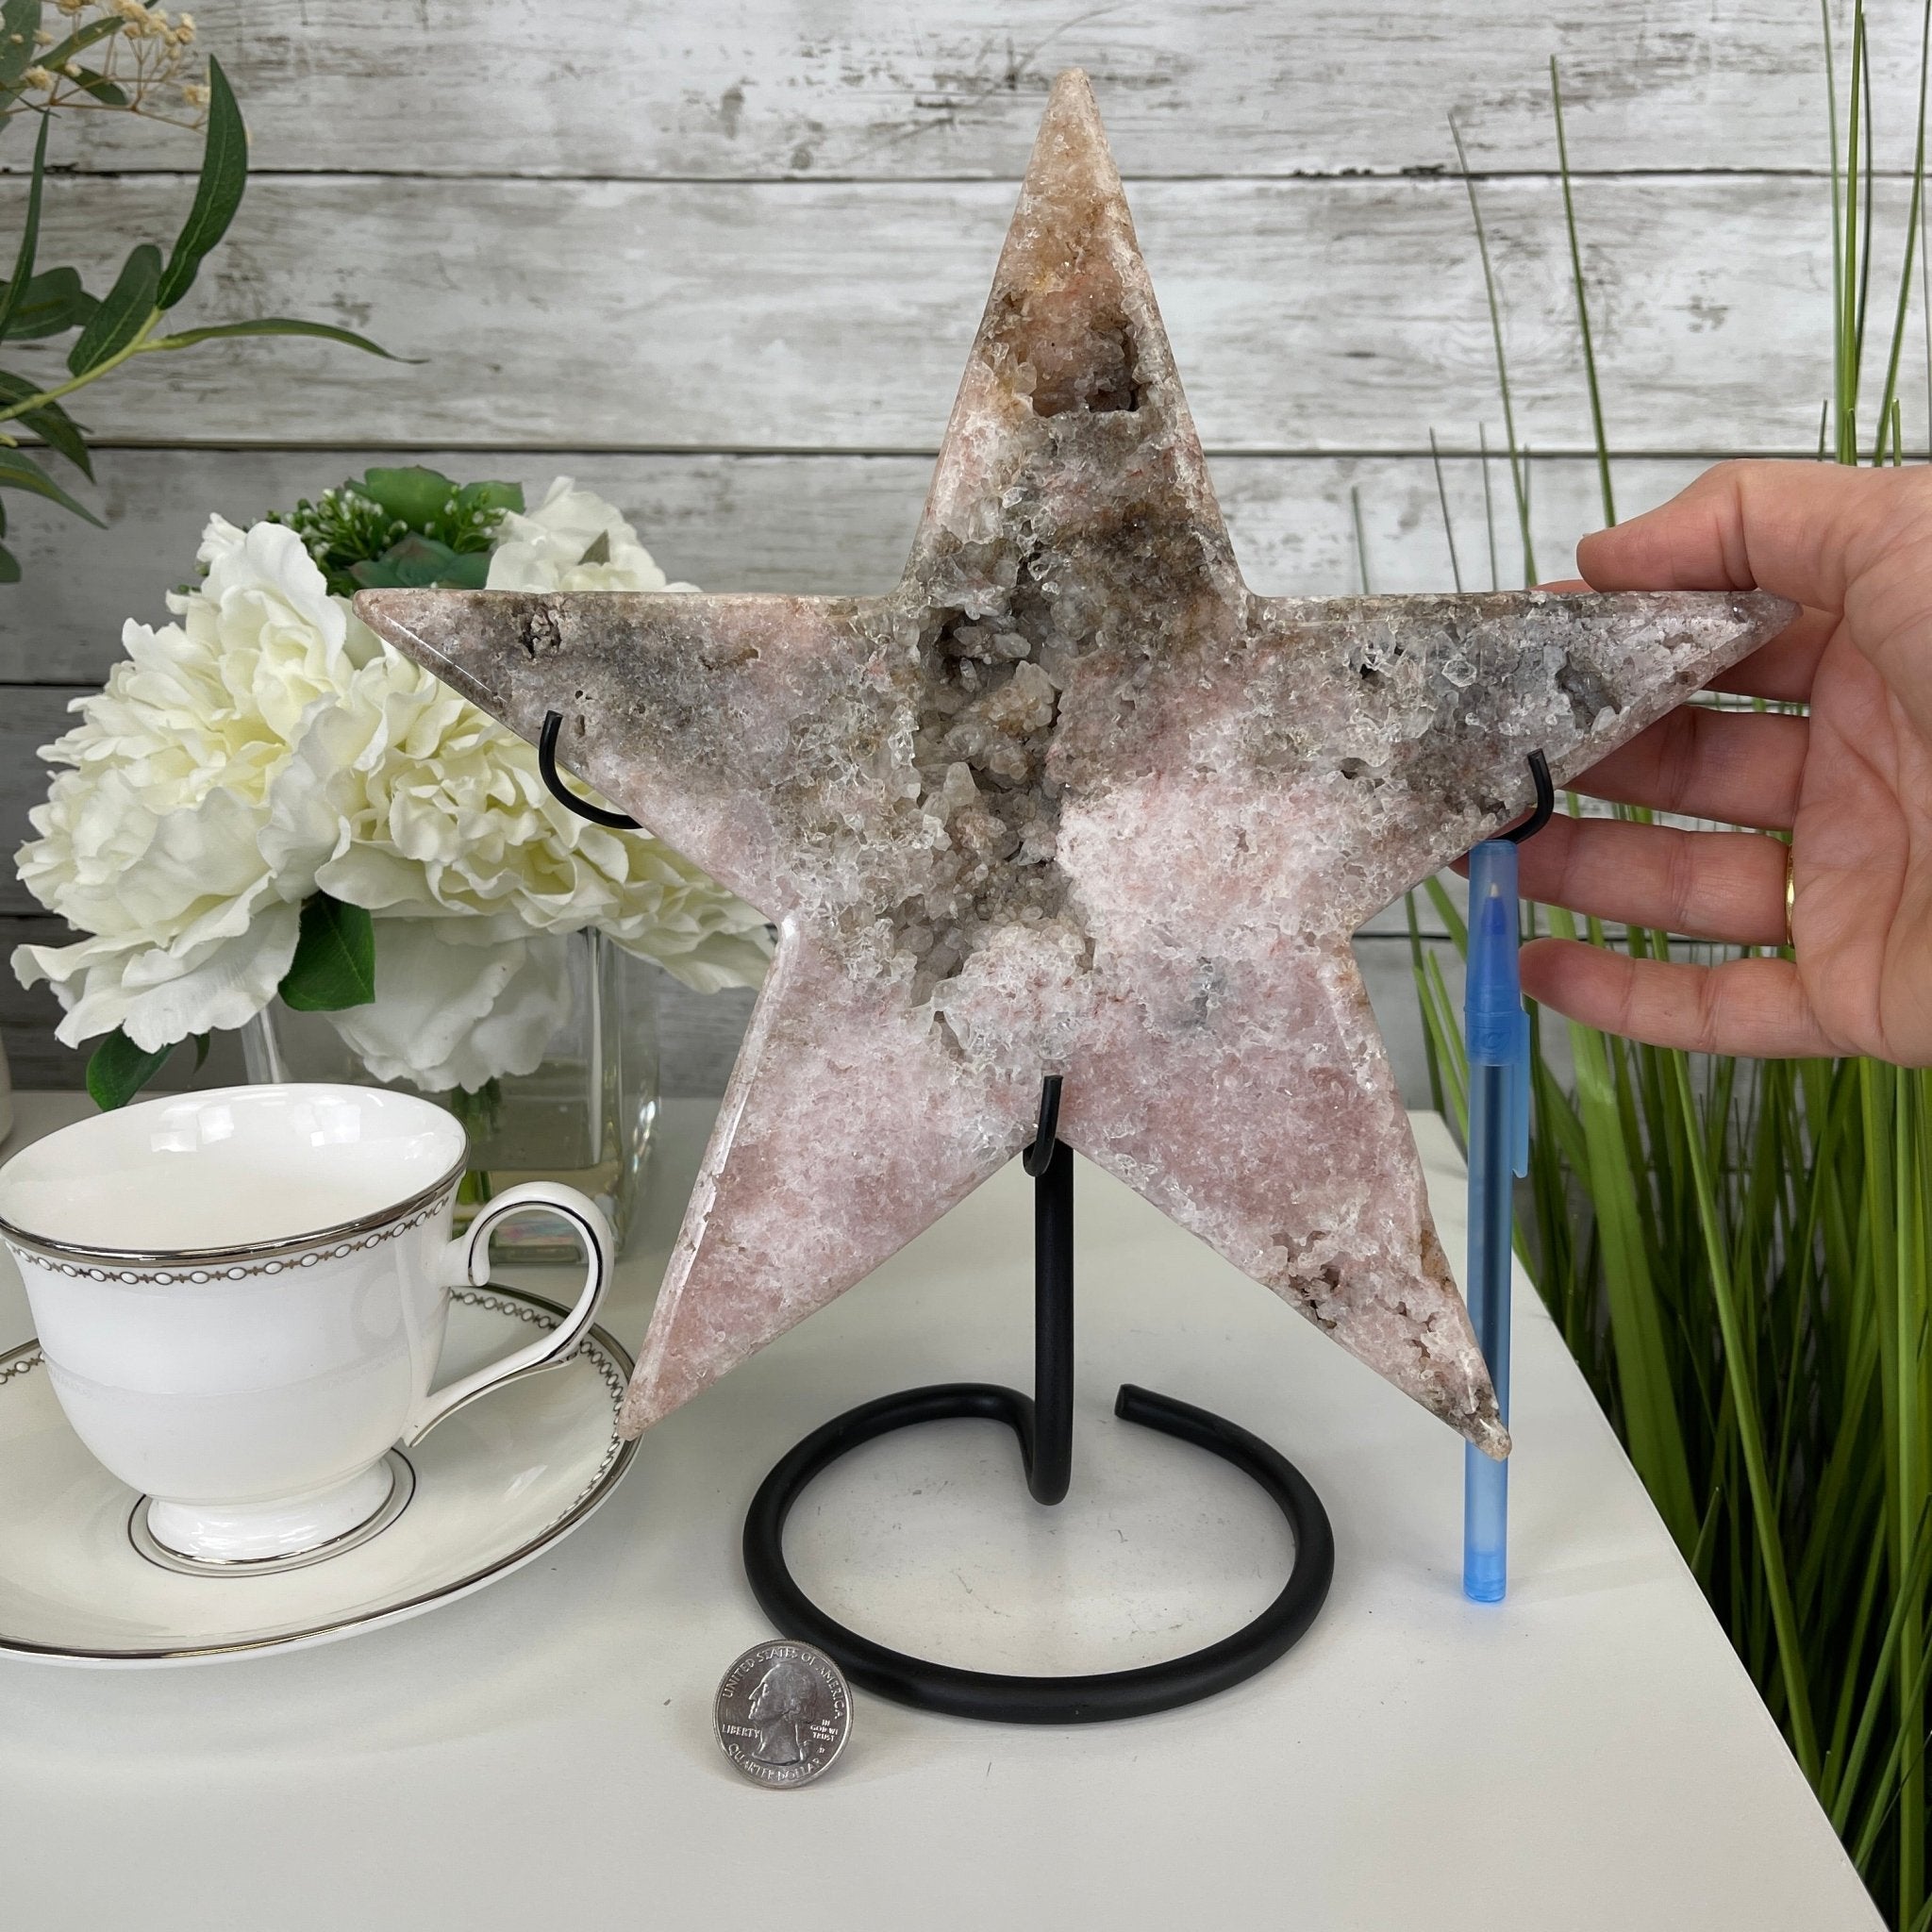 Pink Amethyst Star on a Metal Stand 11.25" Tall #5746-0022 by Brazil Gems - Brazil GemsBrazil GemsPink Amethyst Star on a Metal Stand 11.25" Tall #5746-0022 by Brazil GemsStars5746-0022